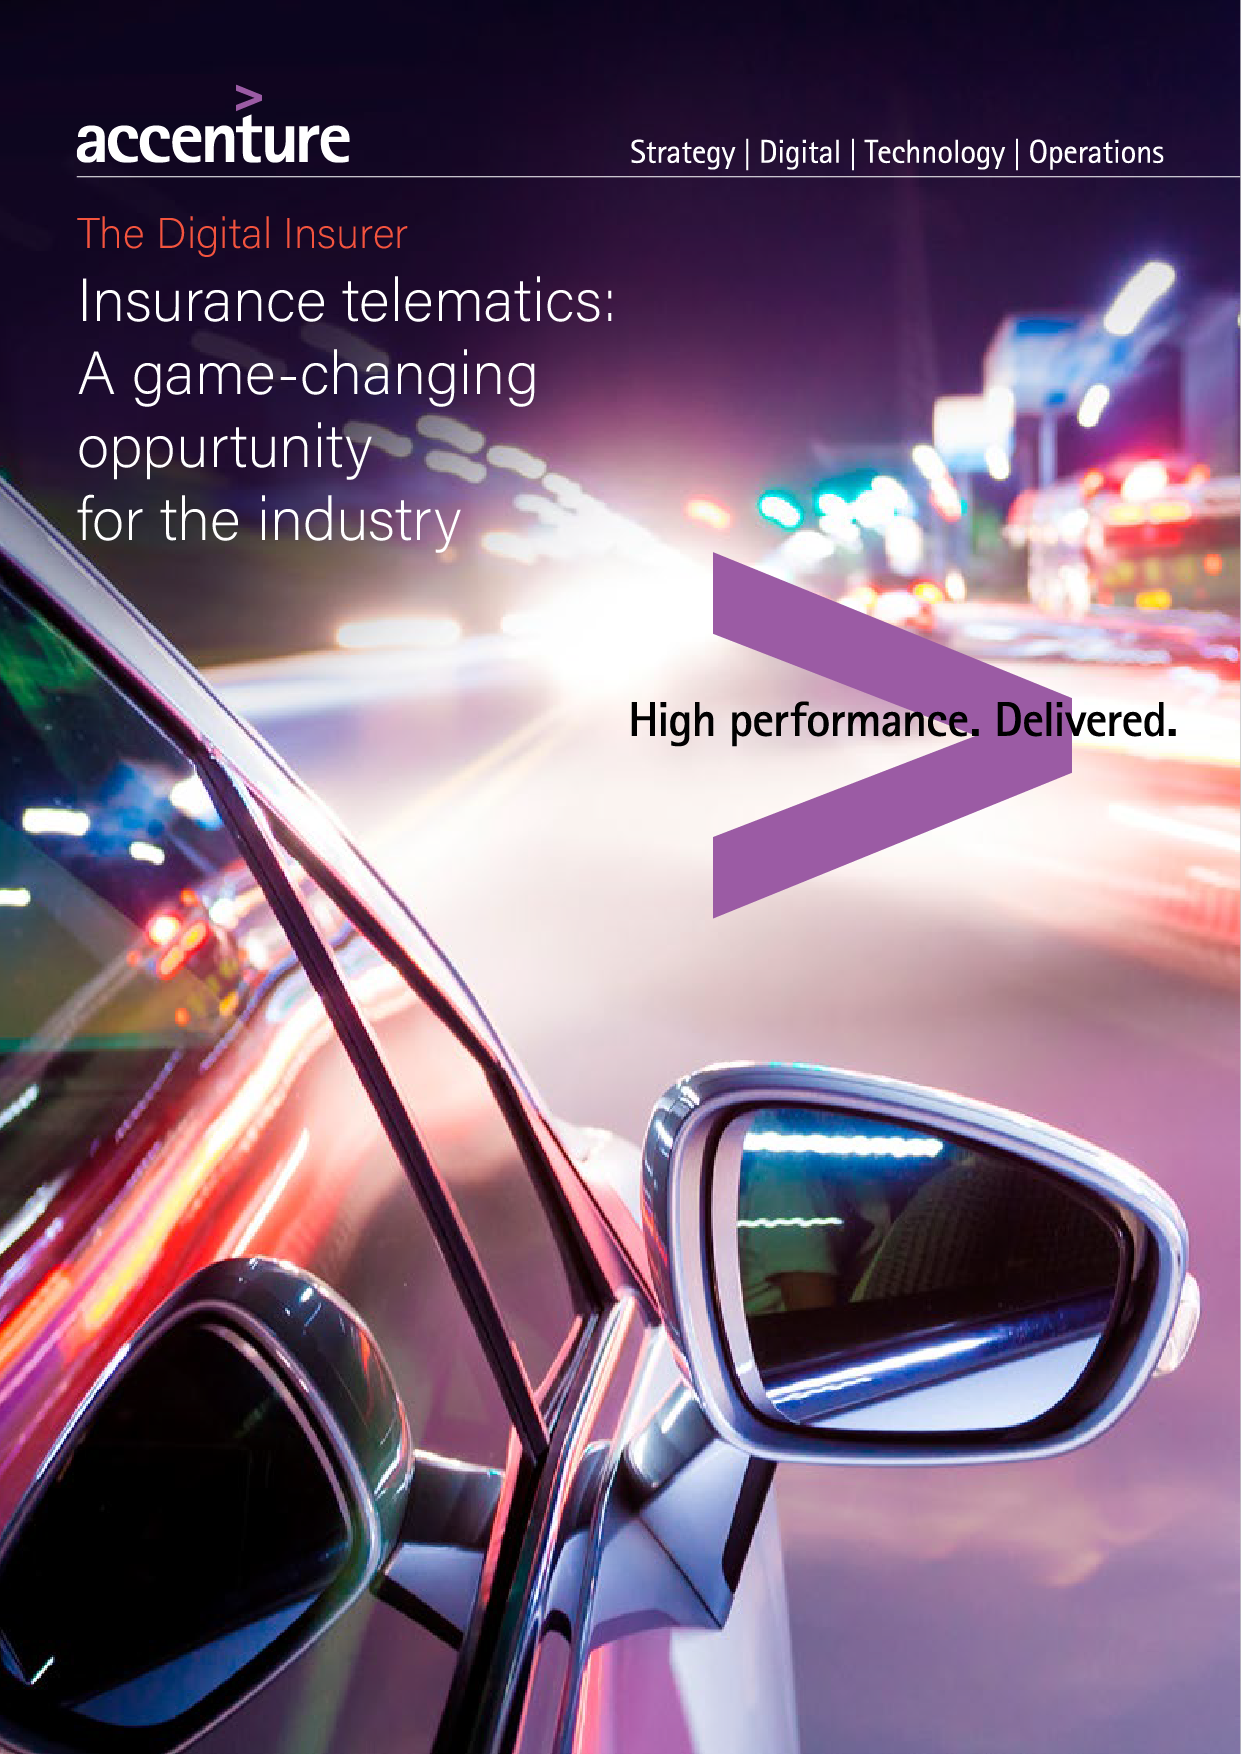 Insurance telematics: A game-changing opportunity for the industry